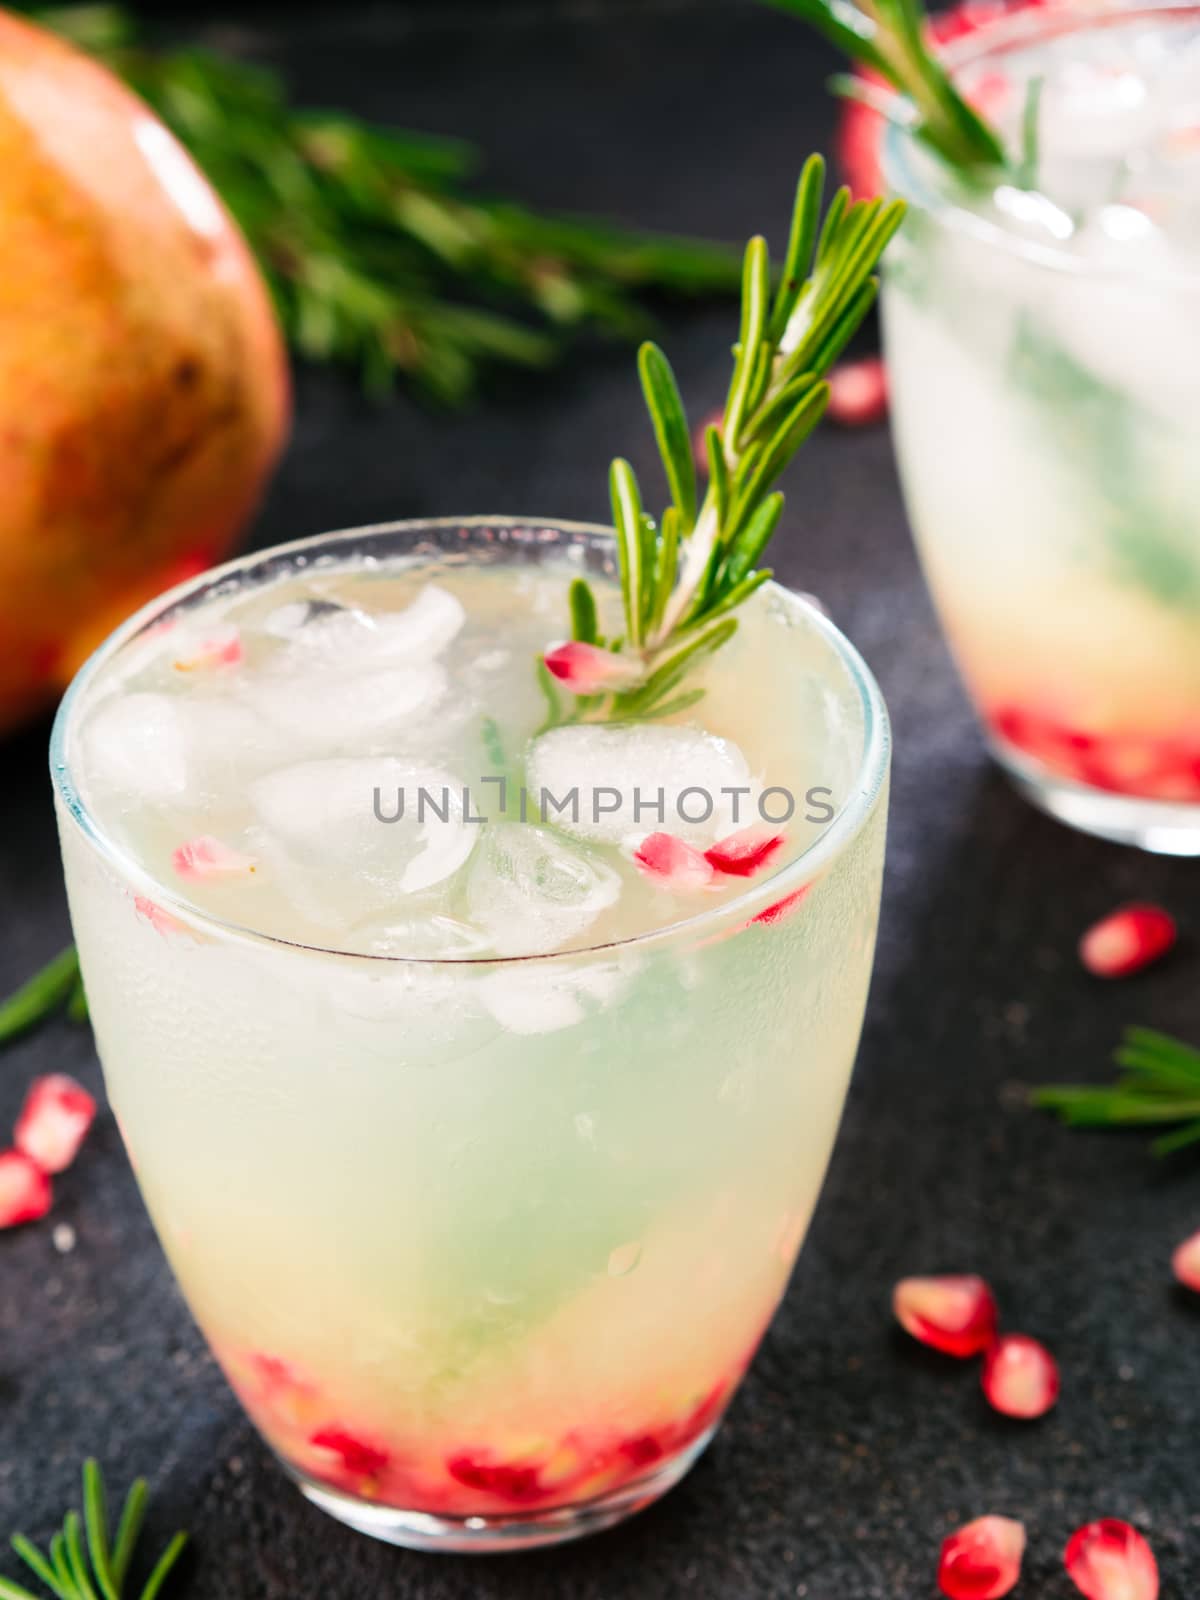 Autumn and winter cocktails idea - white sangria with rosemary, pomegrante and lemon juice and ingredients on black cement background.